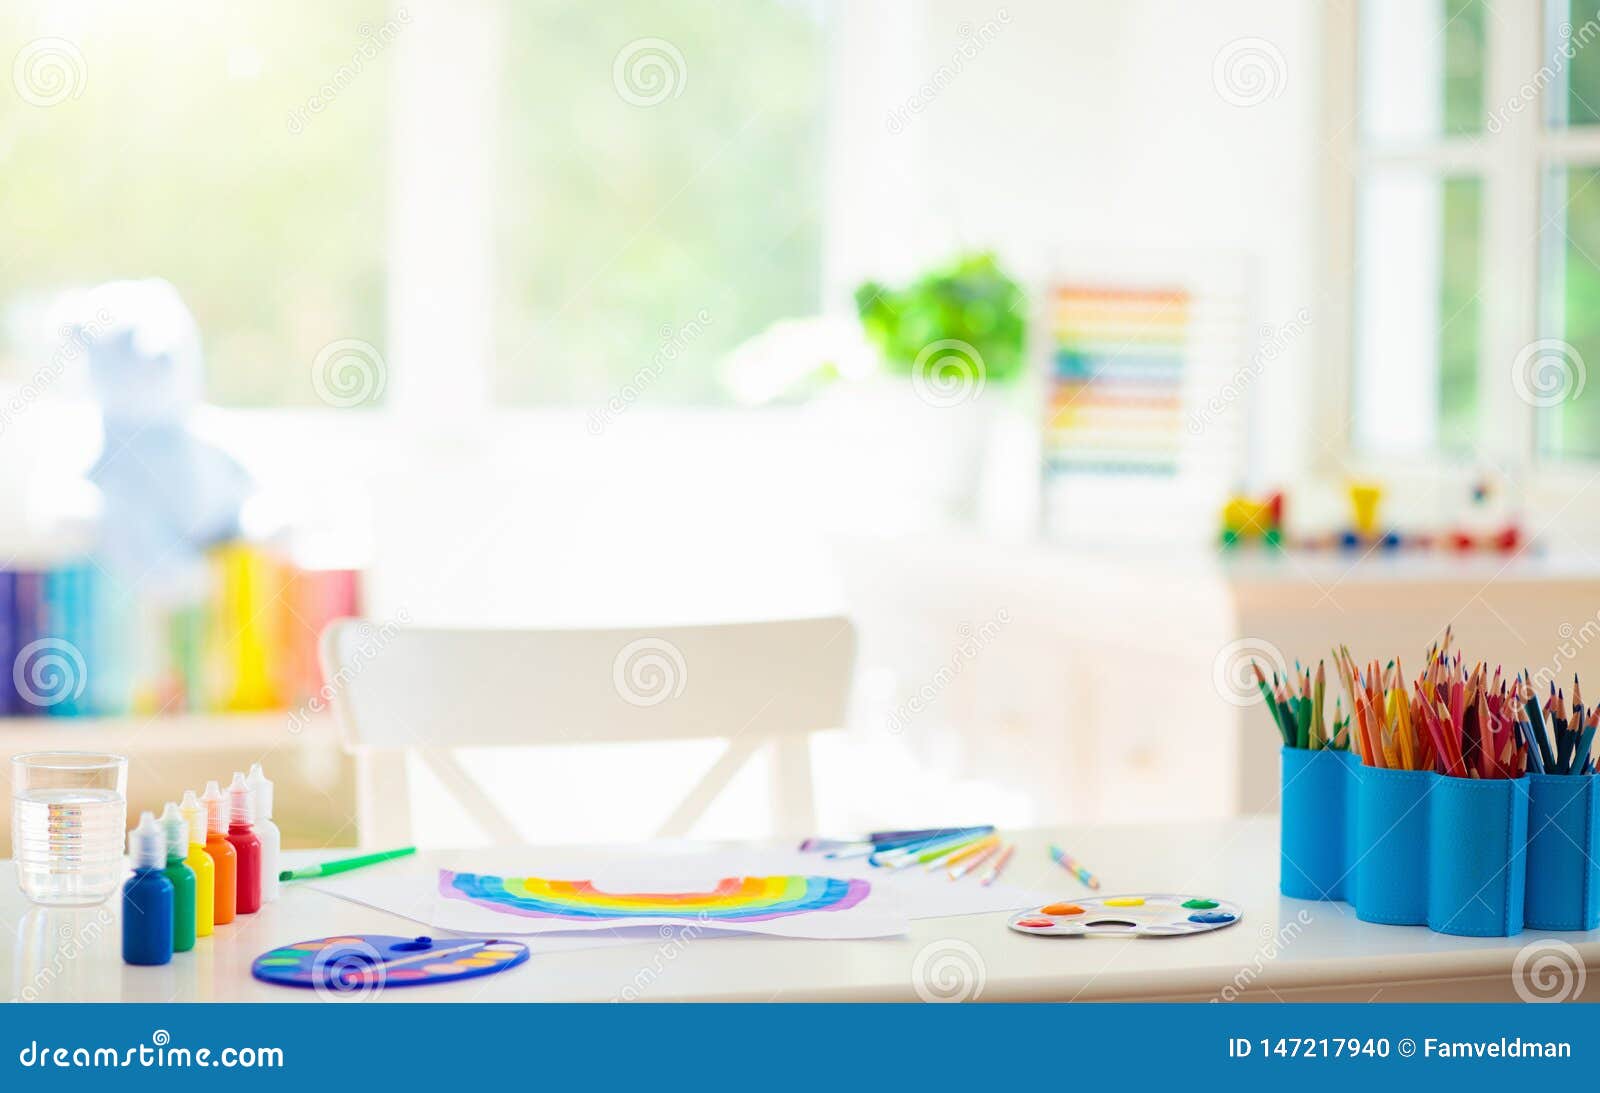 Kids Bedroom With Wooden Paint And Art Supplies Stock Photo